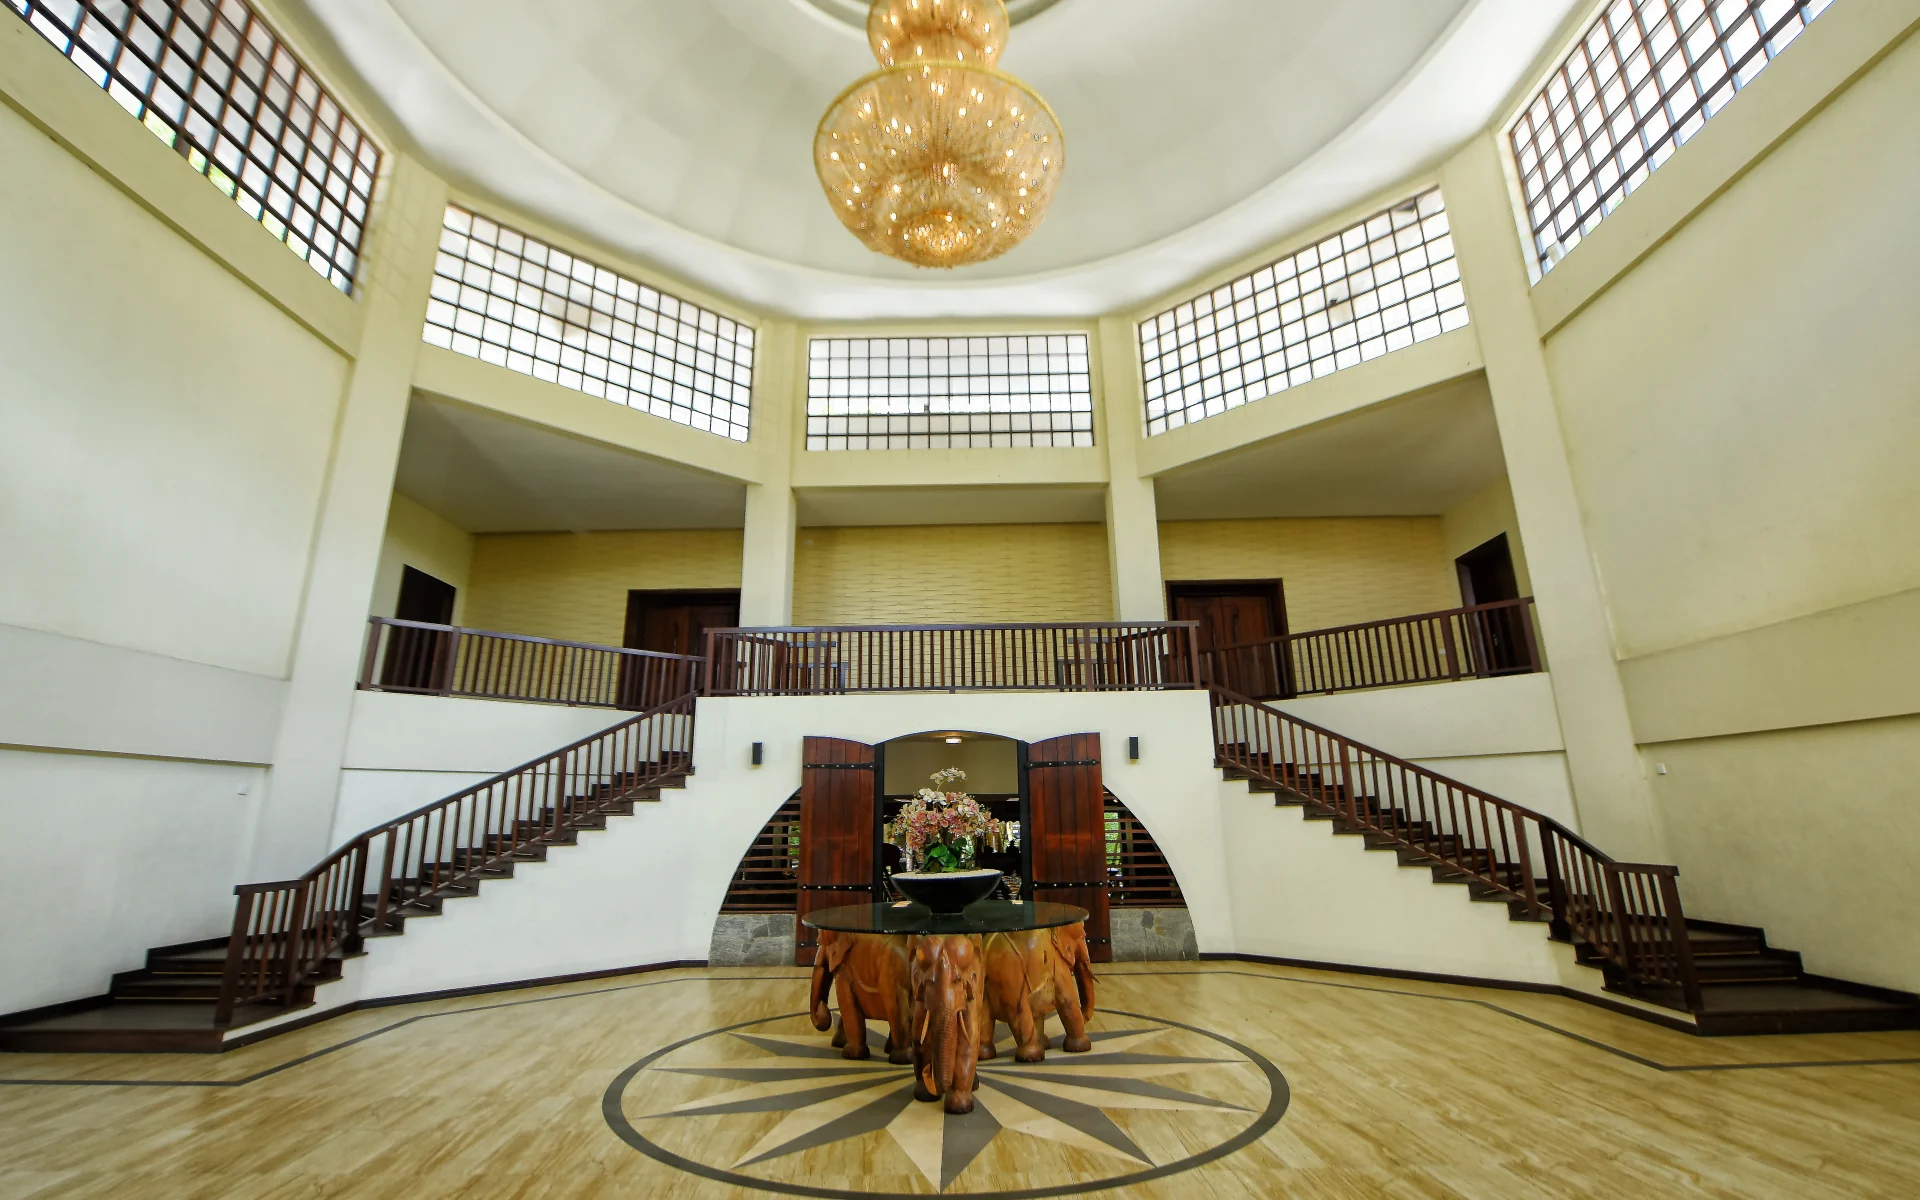 The entrance hall of the Grand Udawalawe is bright and spacious, and a two-way staircase leads to the higher floors.